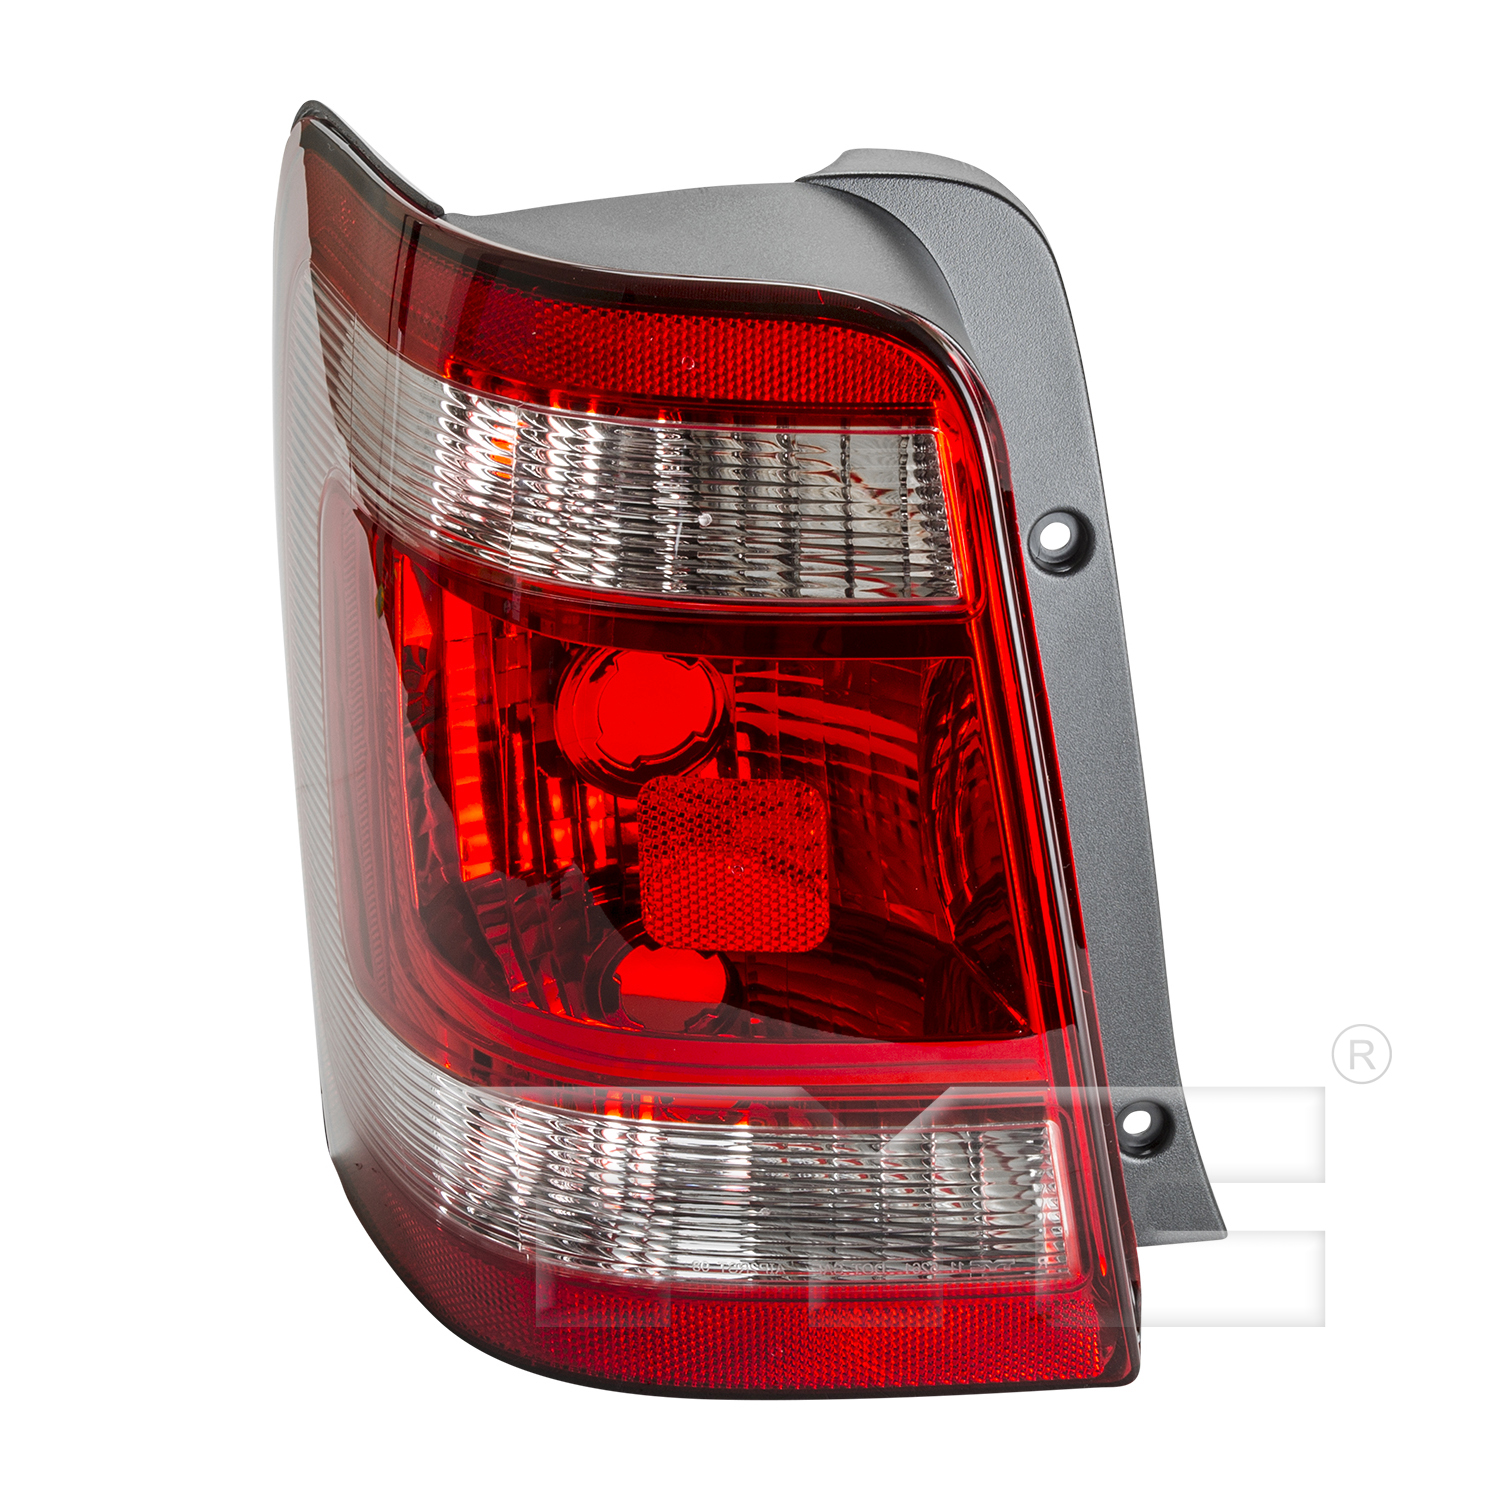 Aftermarket TAILLIGHTS for FORD - ESCAPE, ESCAPE,08-12,LT Taillamp assy